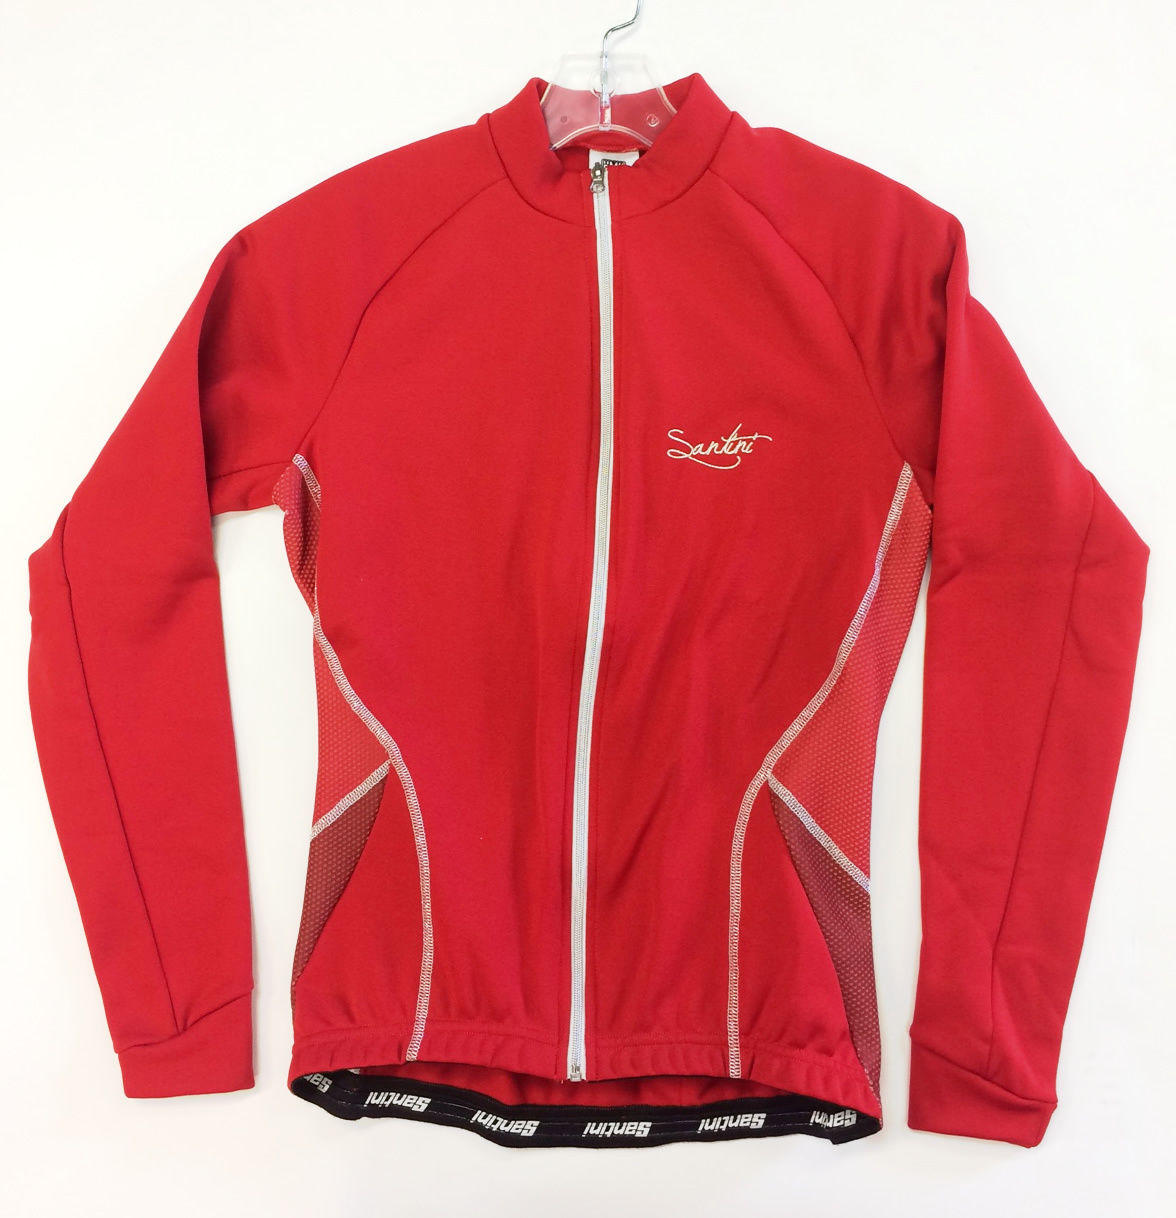 Monella Long Sleeve Womens Jersey Red by Santini